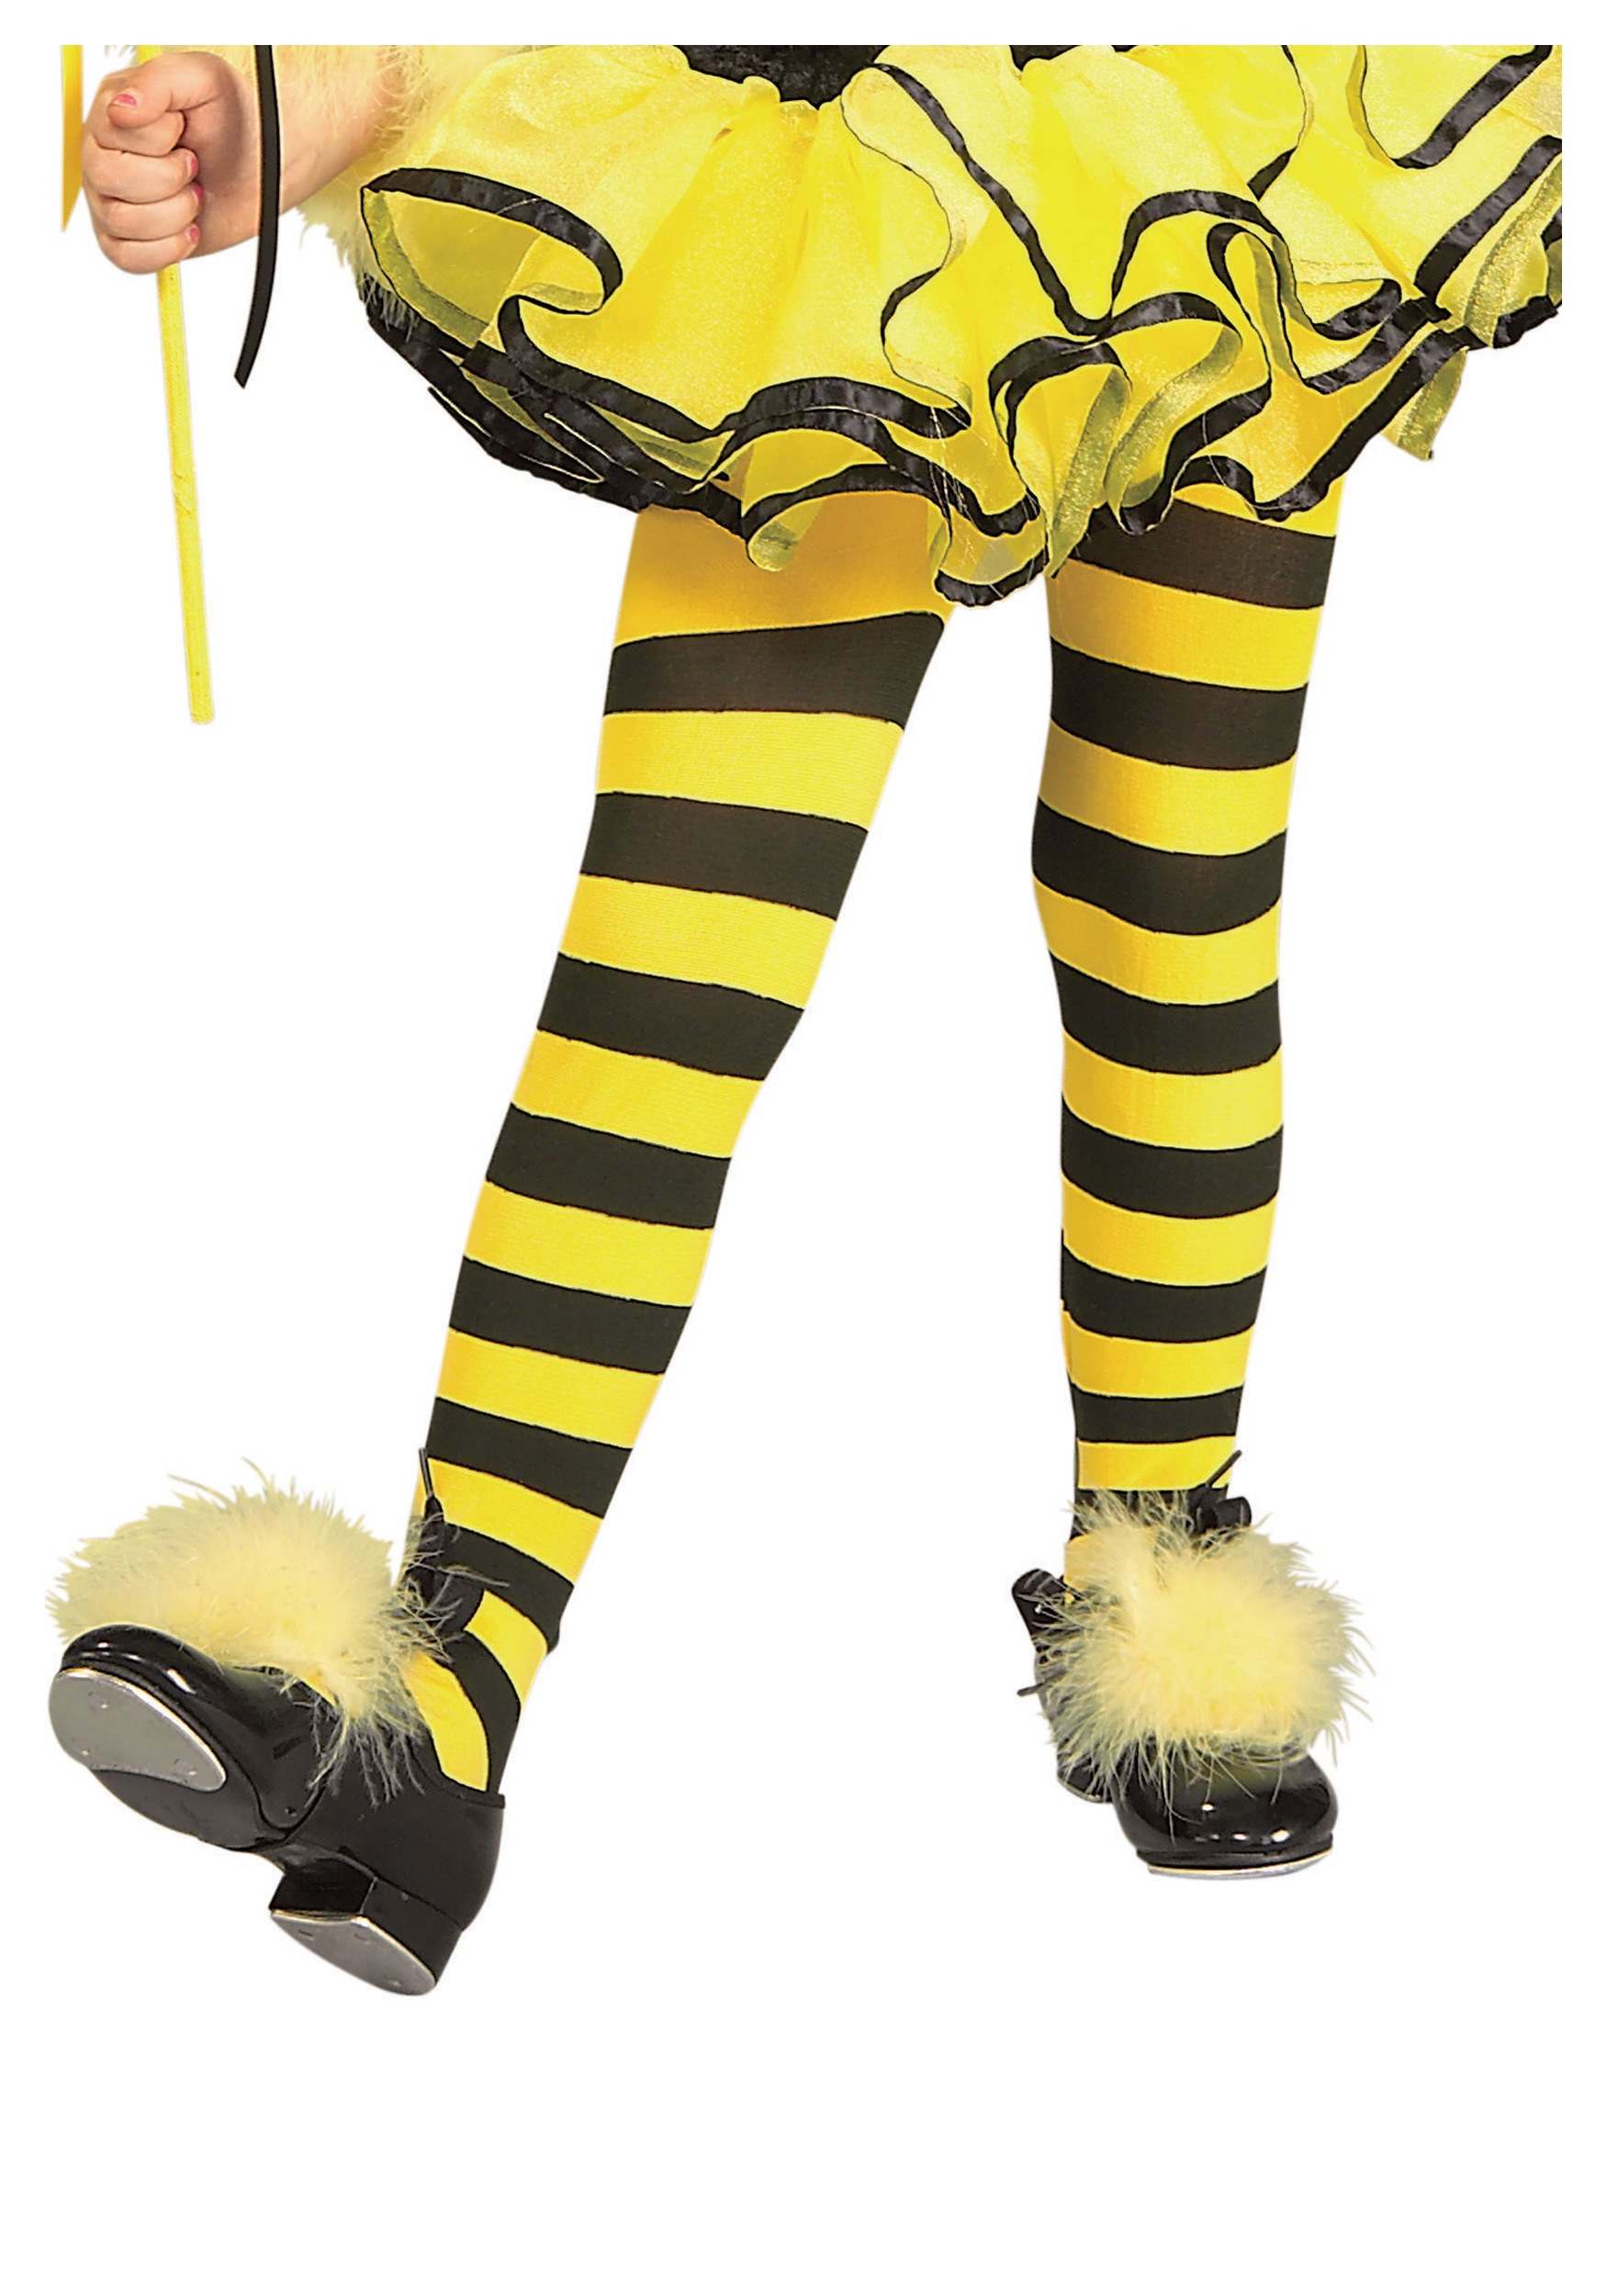 https://images.halloween.com/products/9239/1-1/kids-bumblebee-tights.jpg